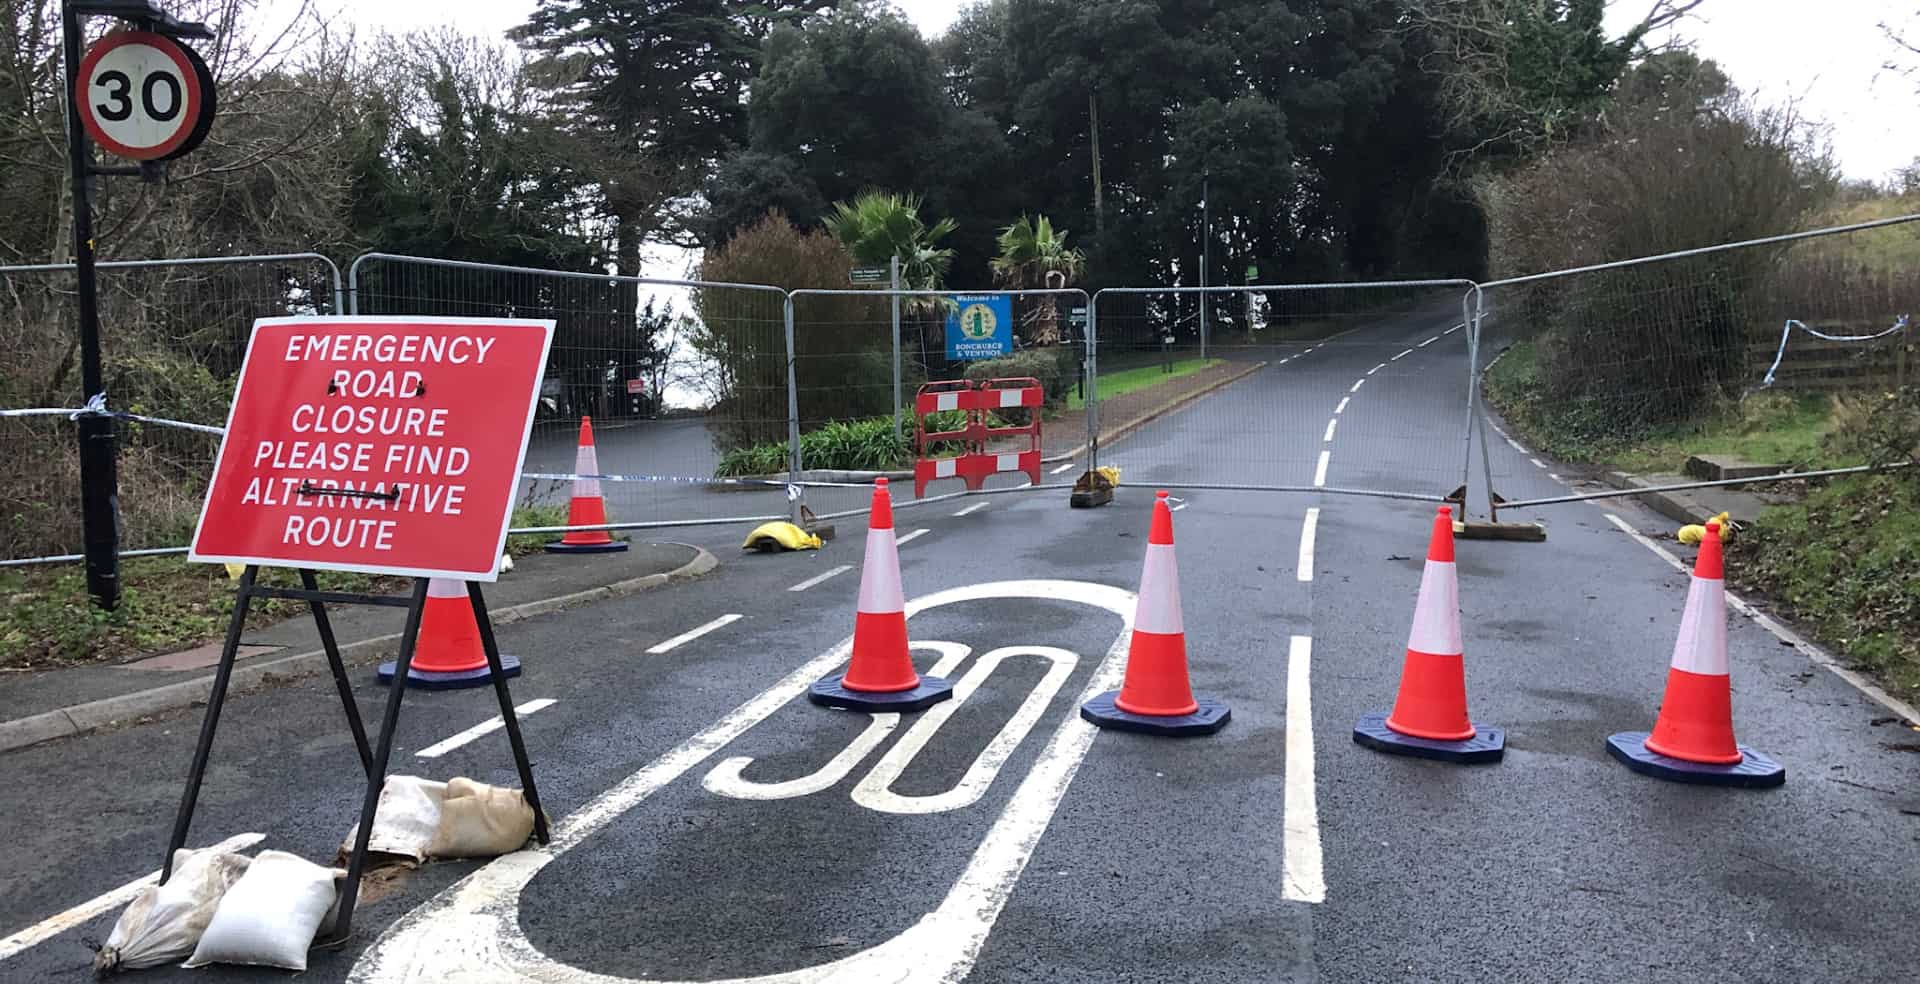 Leeson Road closure from the east